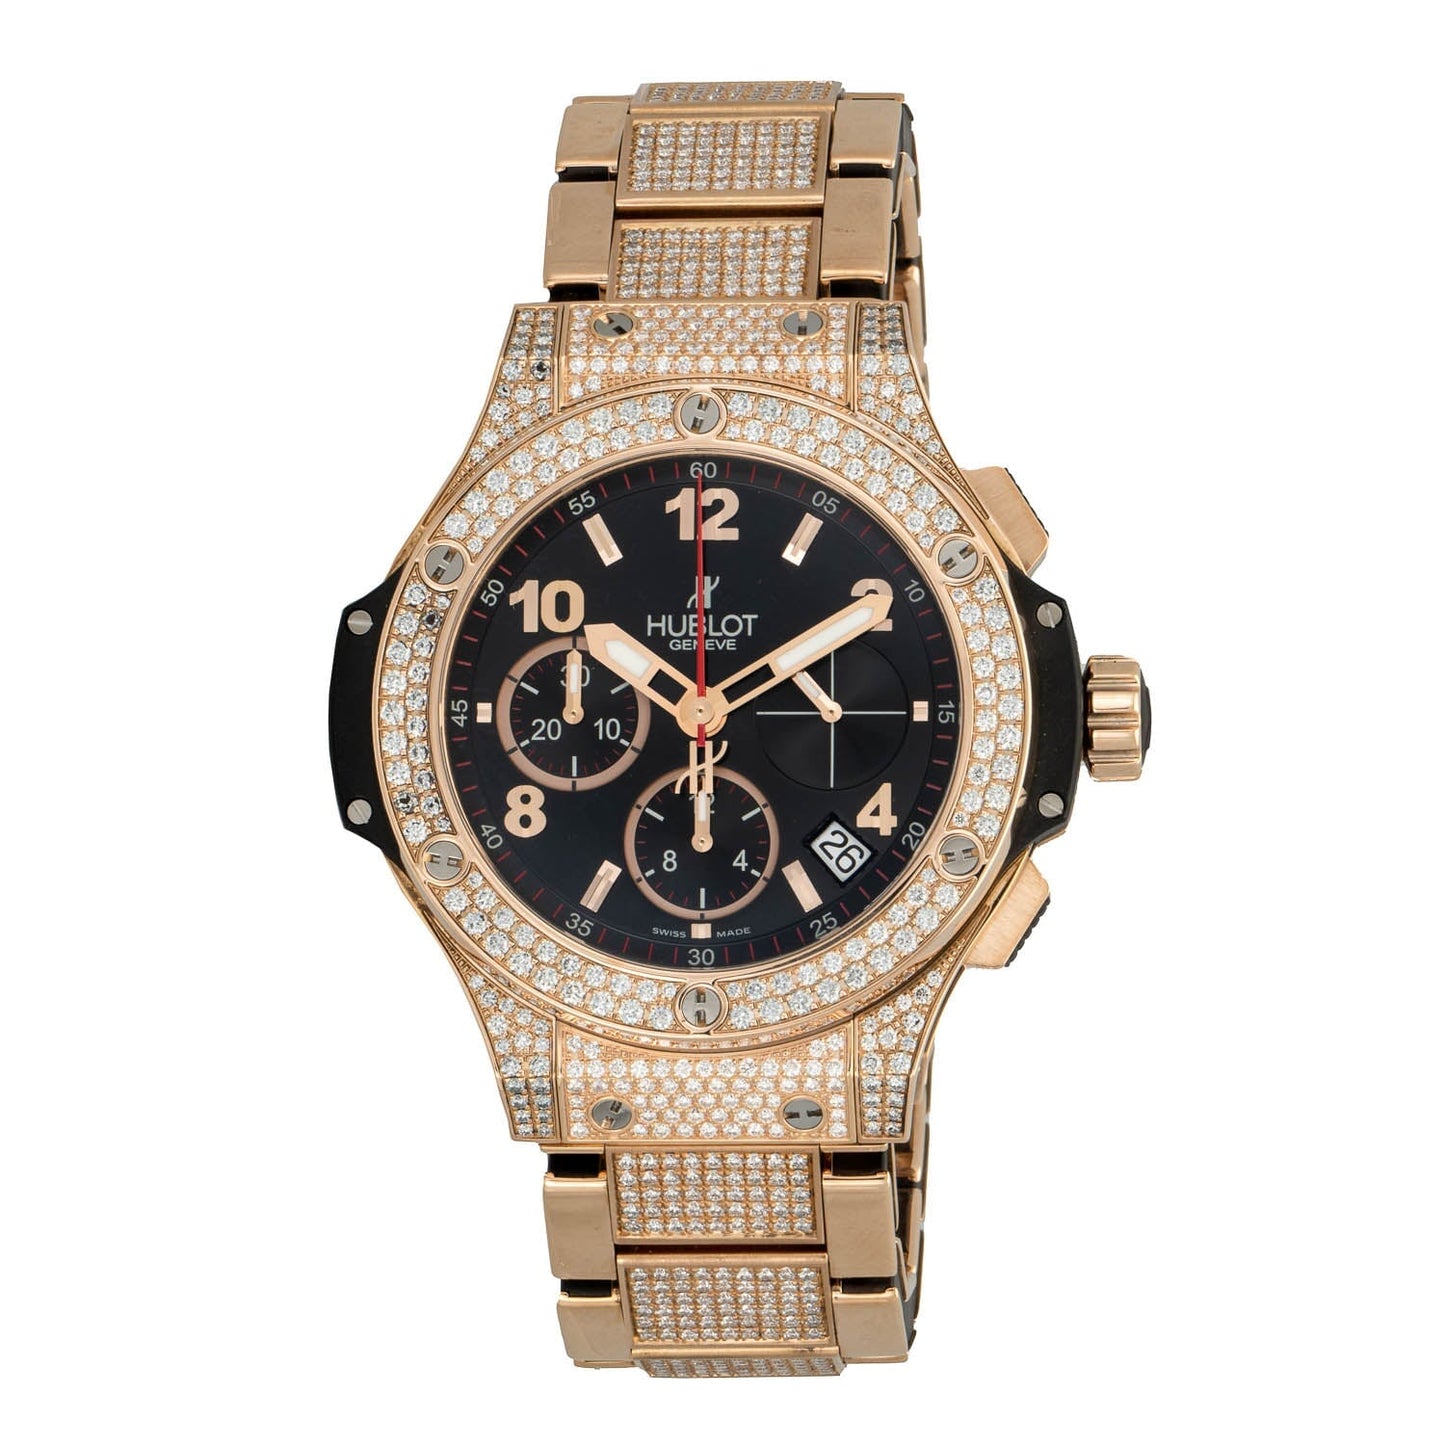 Hublot Big Bang Rose Gold With Pave Diamond 41mm Mens Watch 341.PX.1223.PX.2704